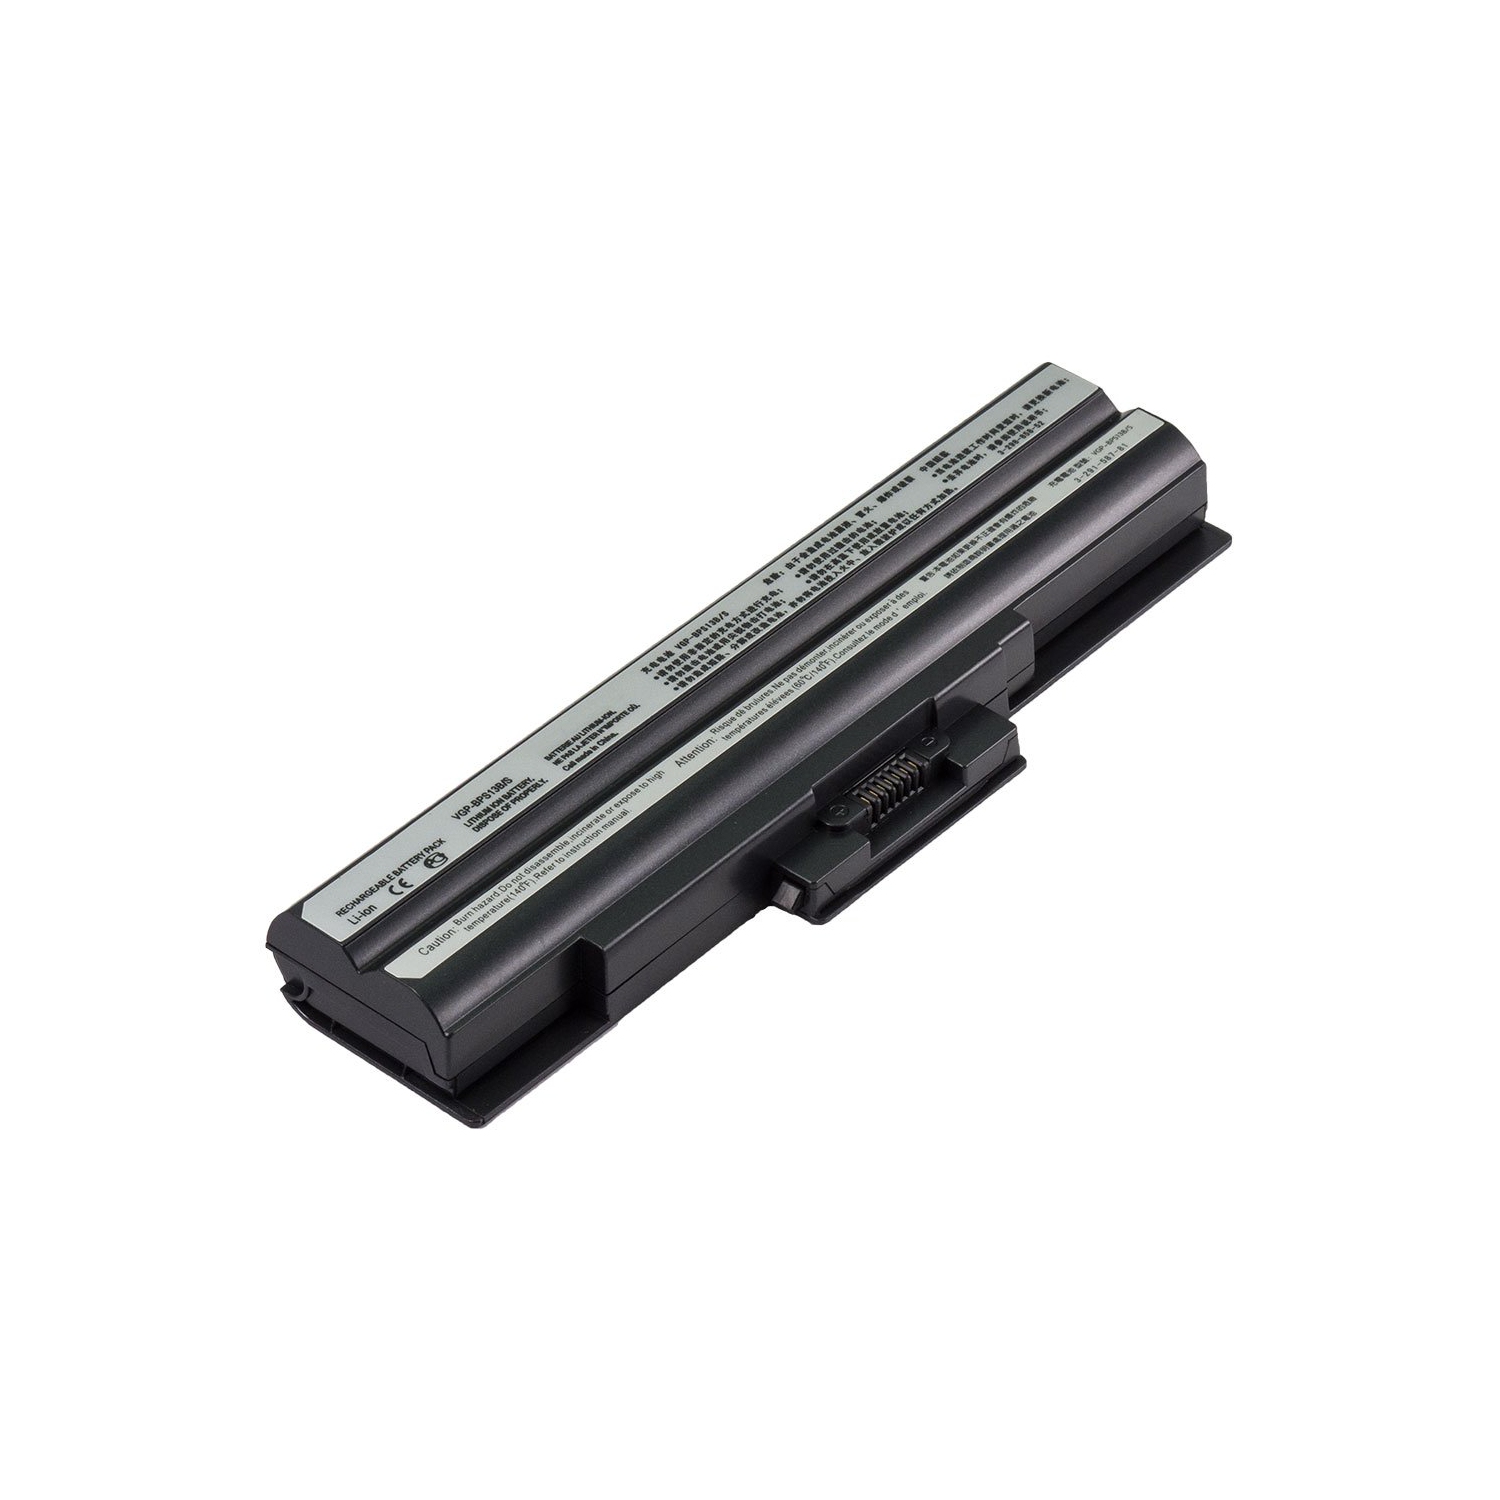 Laptop Battery Replacement for Sony VAIO VGN-NS21M/P, VGP-BPS13, VGP-BPS13/S, VGP-BPS13A/Q, VGP-BPS13B/B, VGP-BSP13/S